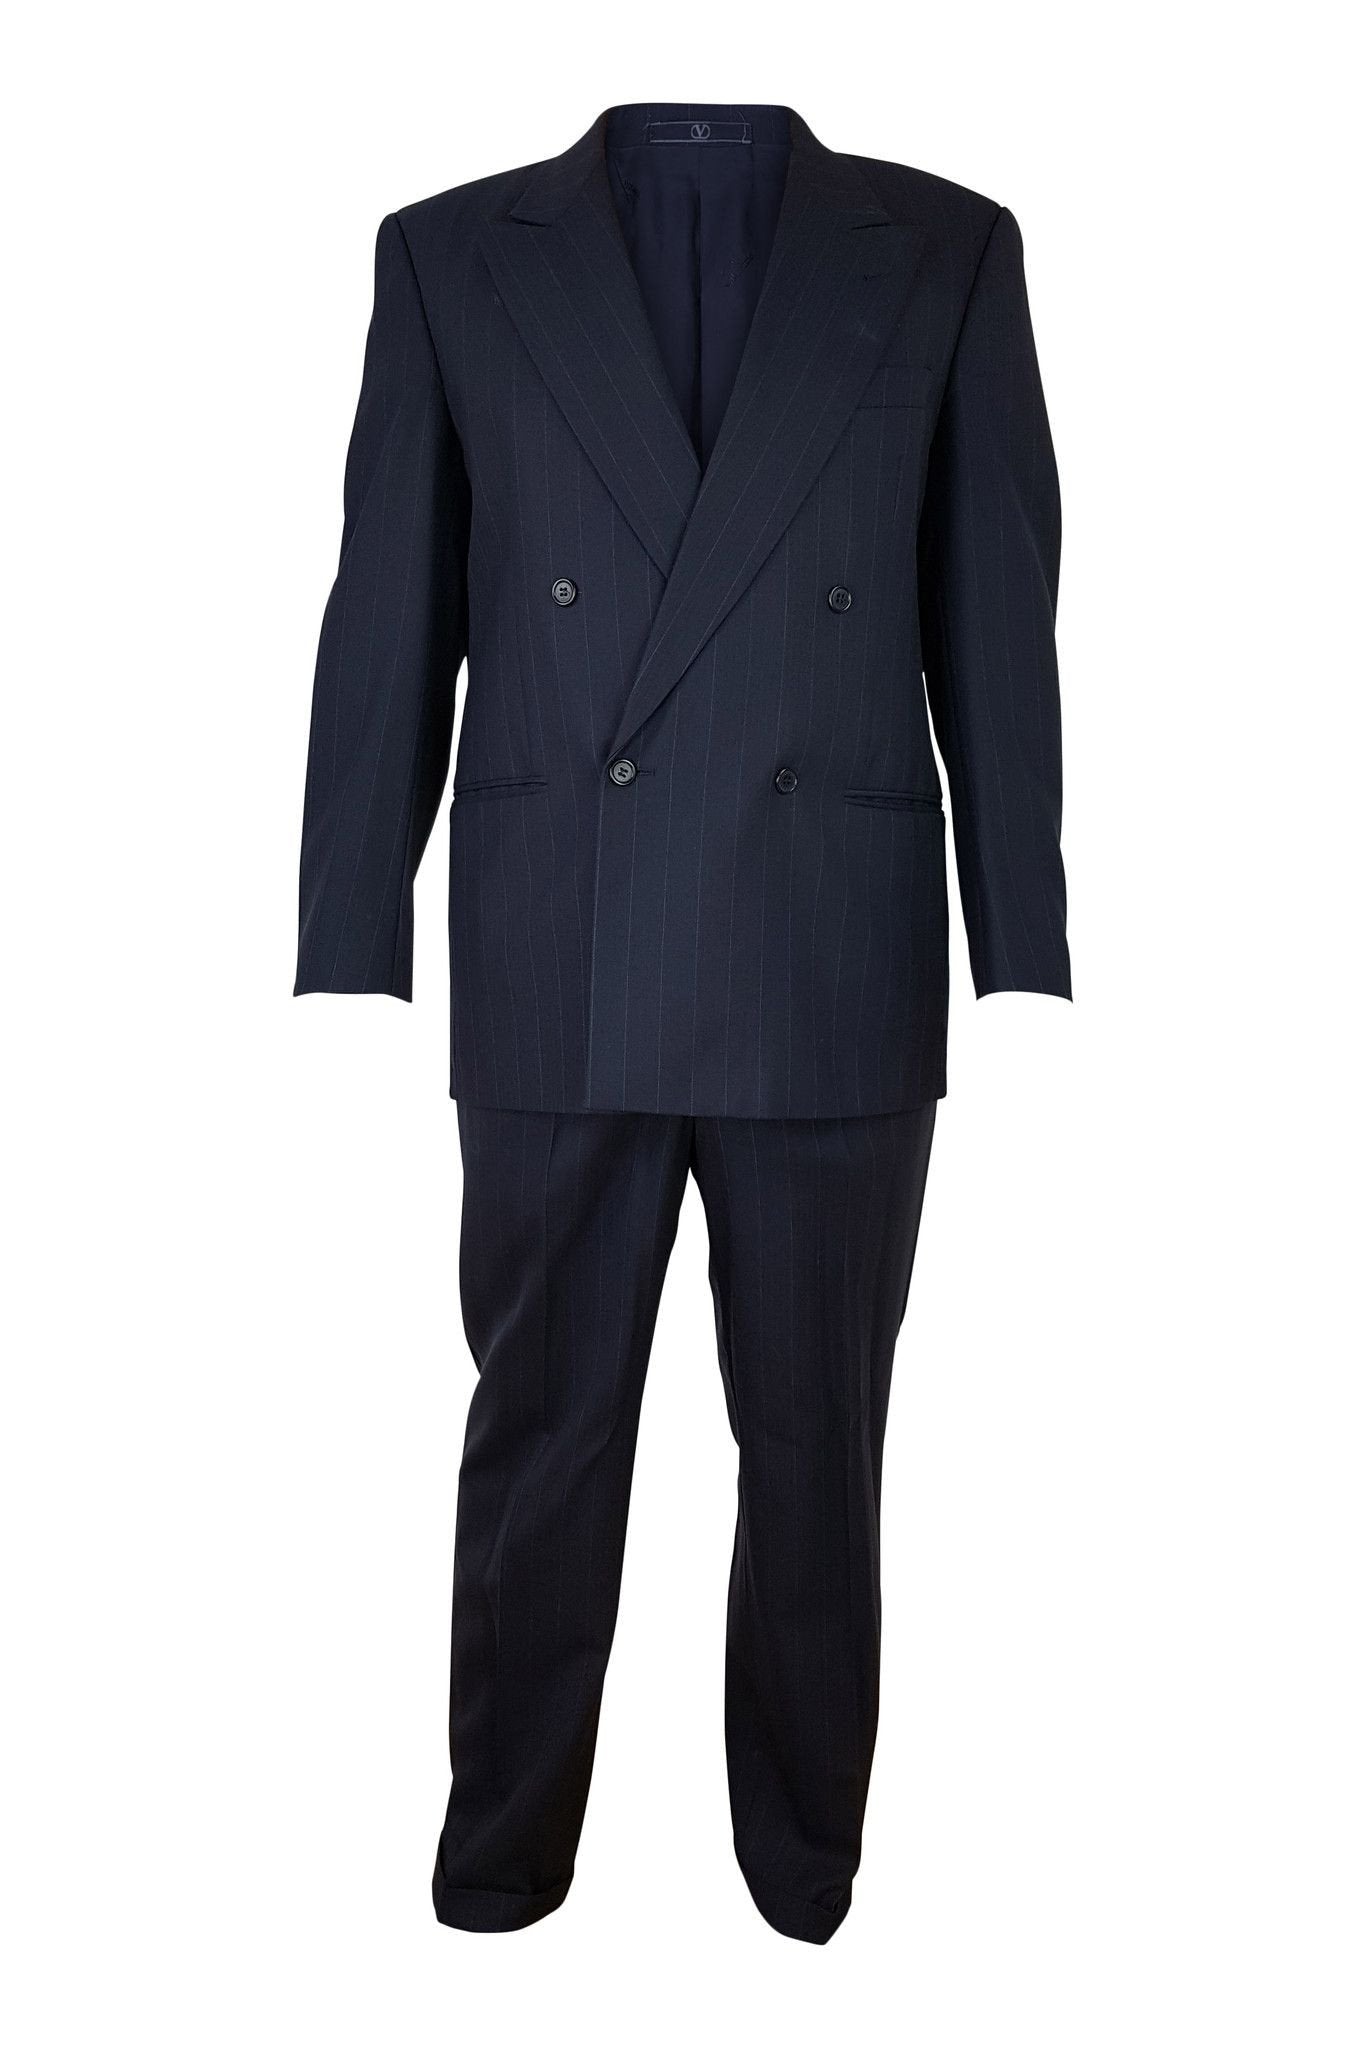 VALENTINO Double Breasted Navy Pinstripe Wool Suit-Valentino-The Freperie